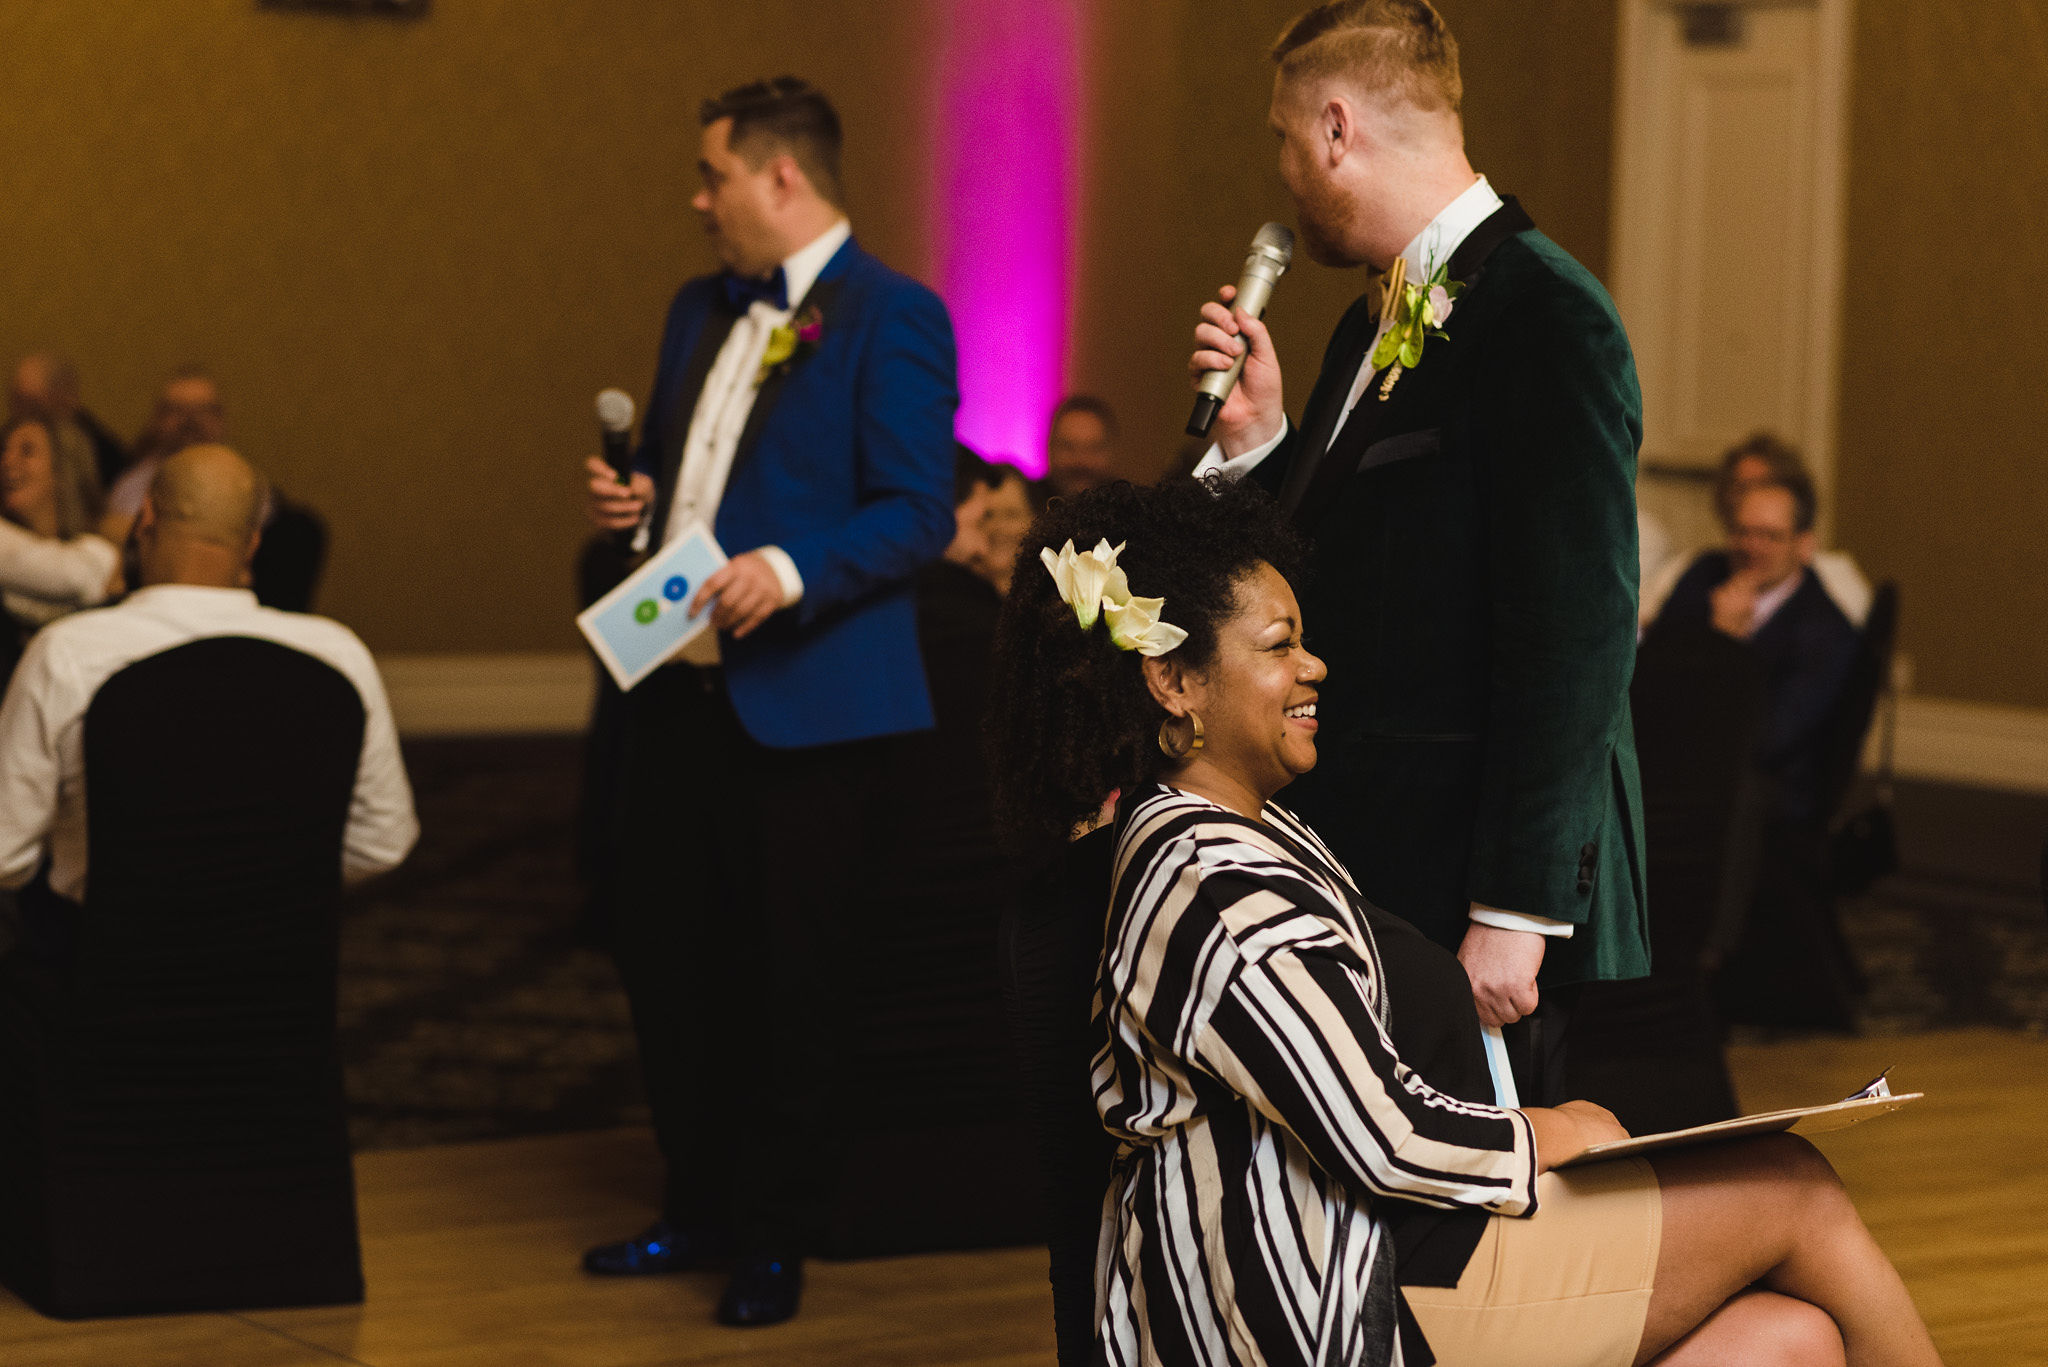 grooms instructing guests about the rules for the game they planned for their fun wedding at the Hilton Fallsview in Niagara Falls